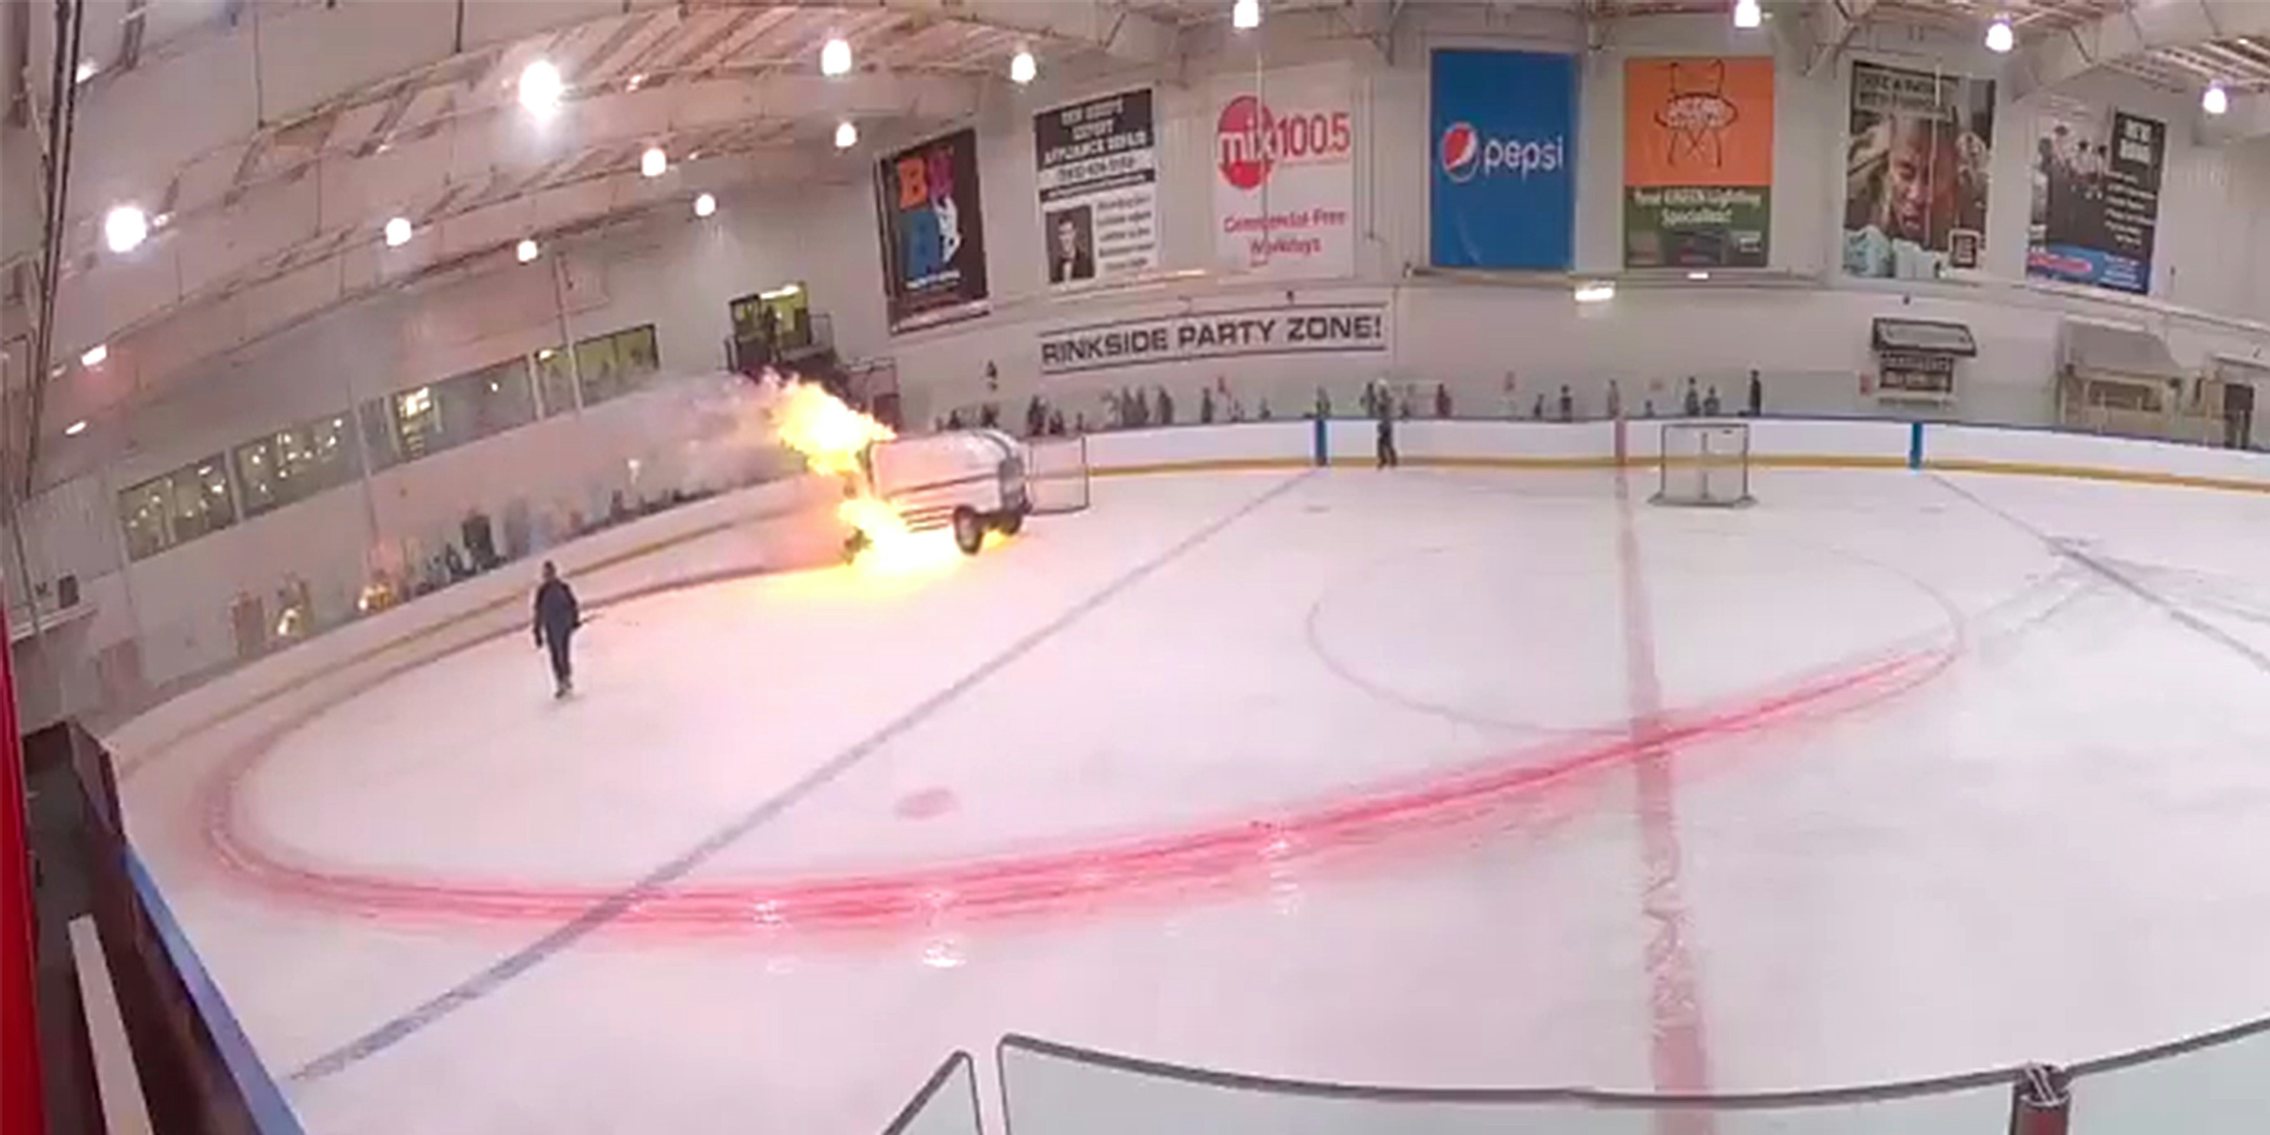 zamboni on fire in the center of a hockey rink